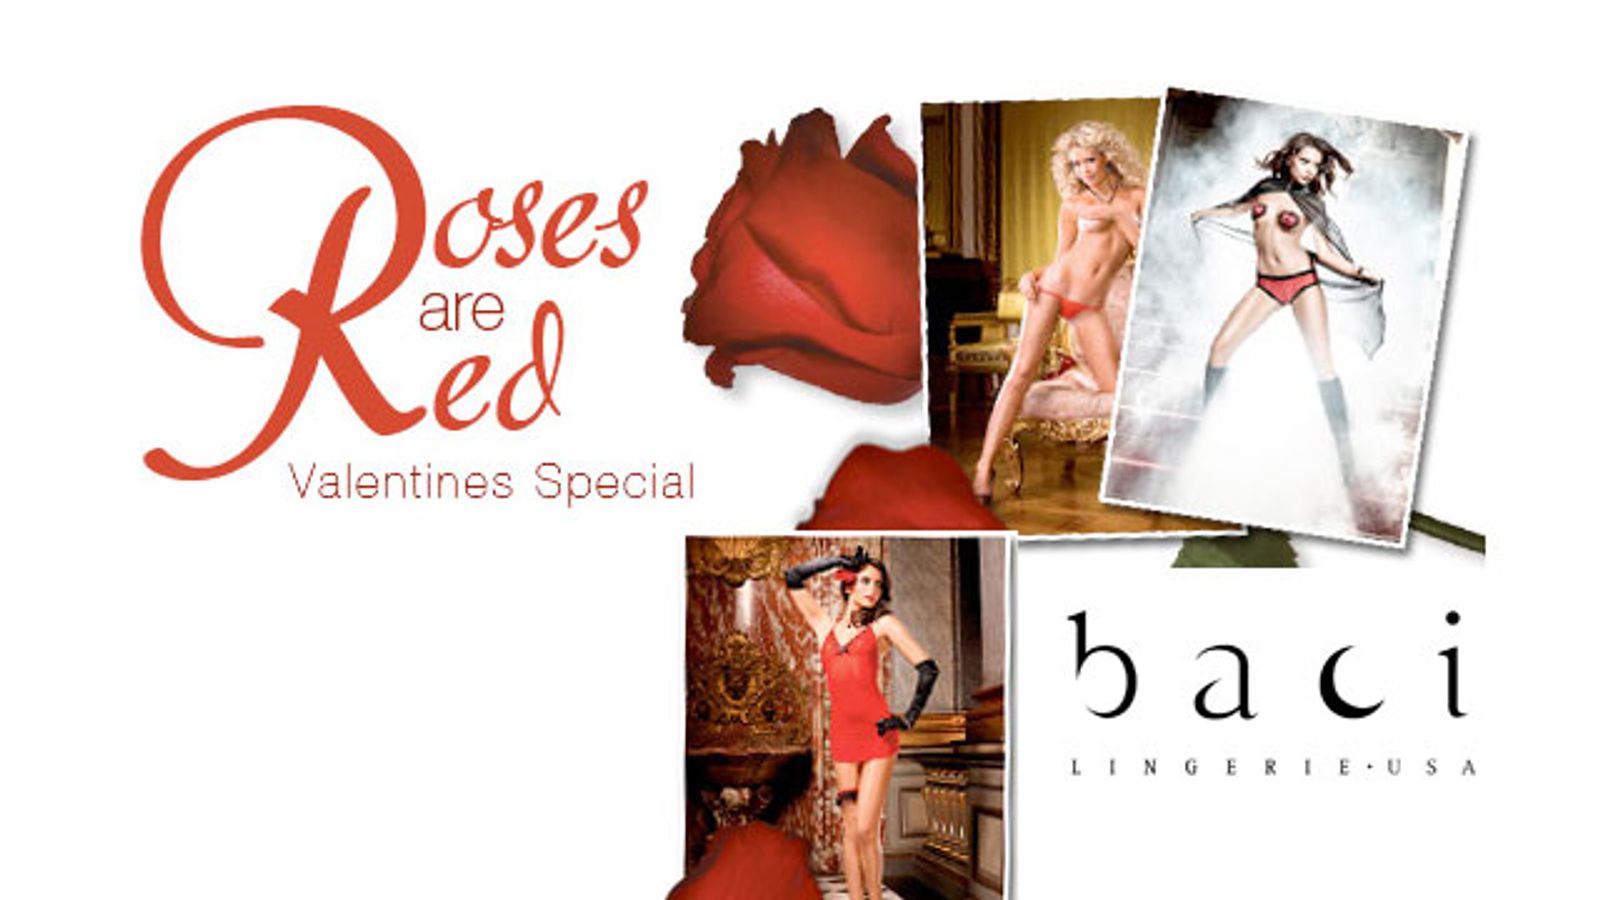 Baci Offers 'Roses Are Red' Valentine's Sales Promotion